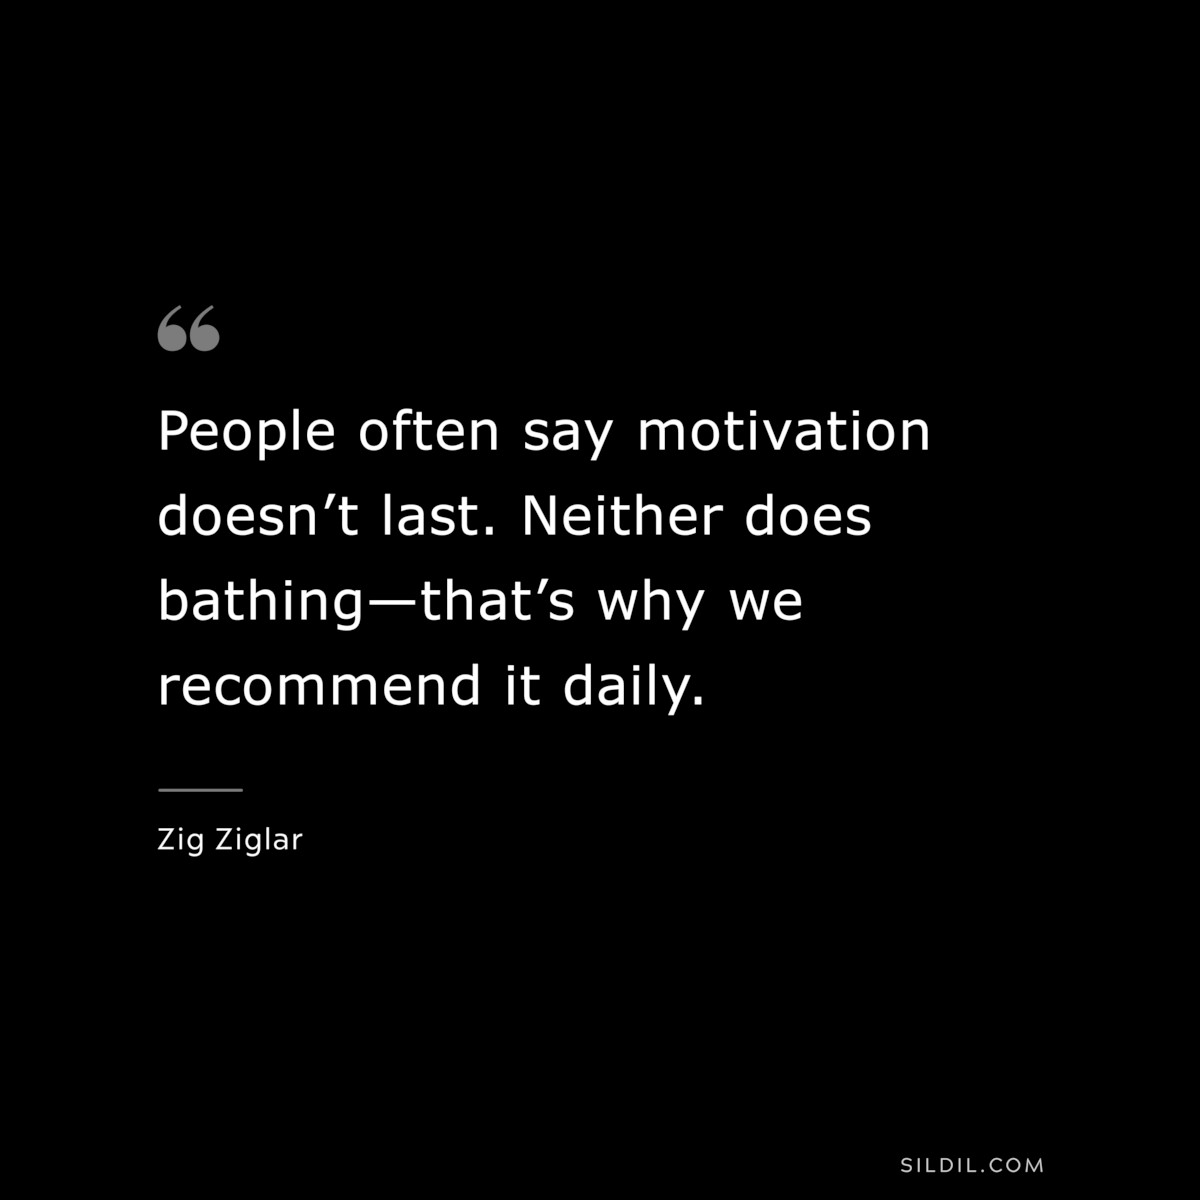 People often say motivation doesn’t last. Neither does bathing—that’s why we recommend it daily. ― Zig Ziglar